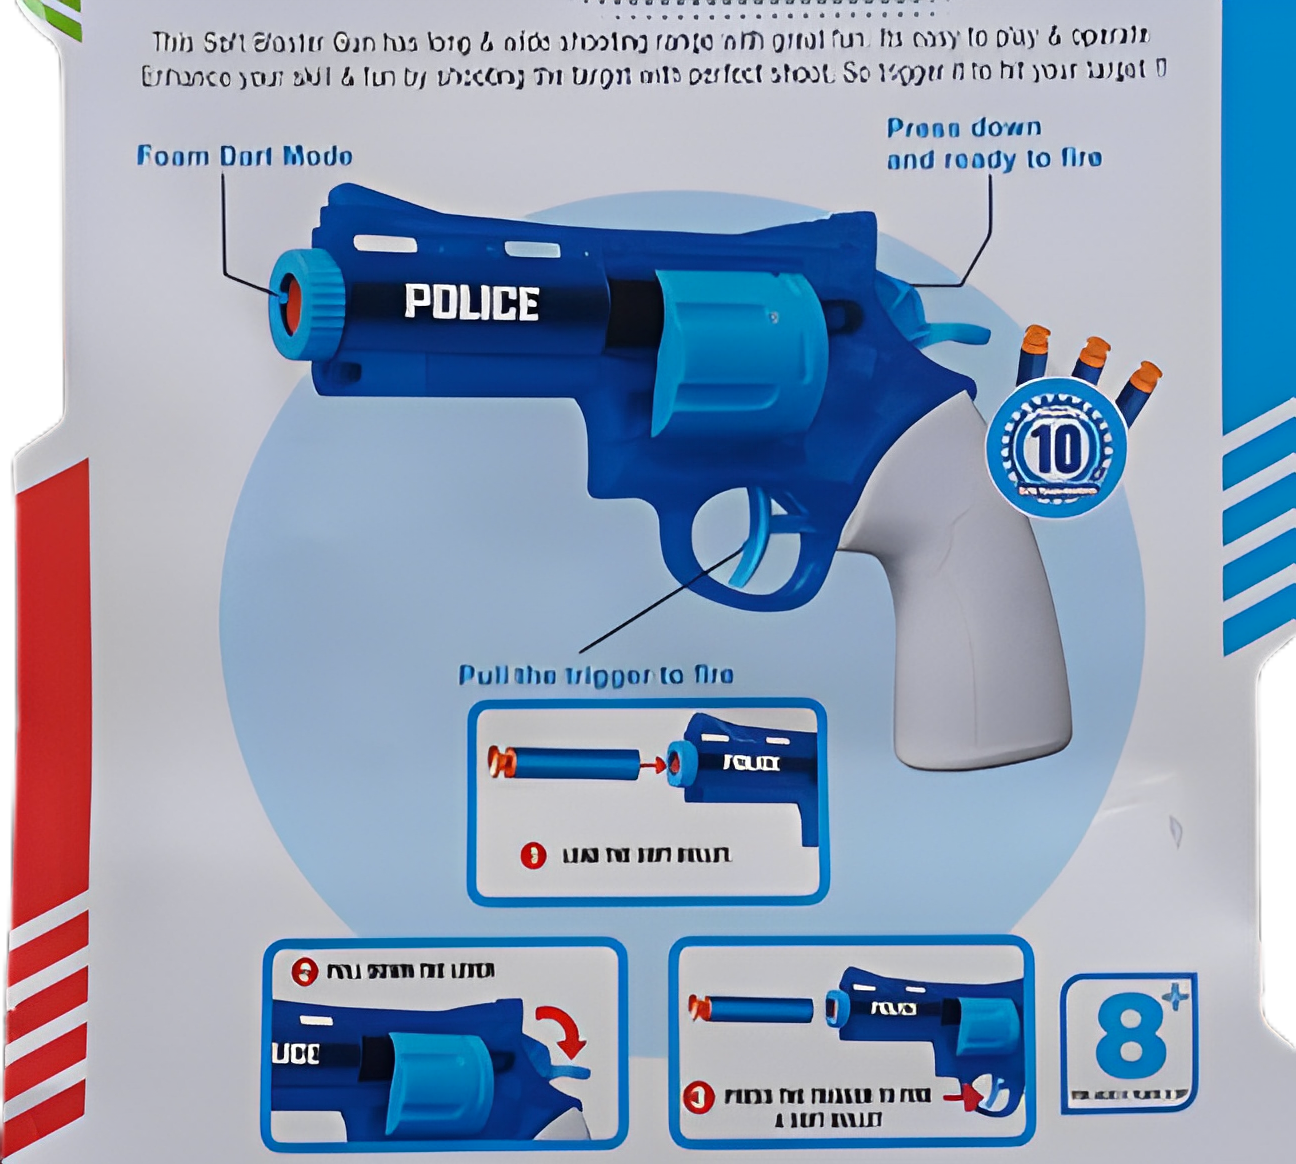 Police Officer Roleplay, Police Role Play Toy Game Set With Handcuffs, Police Badge, And 2-in-1 Soft Bullet Gun And Water Gun